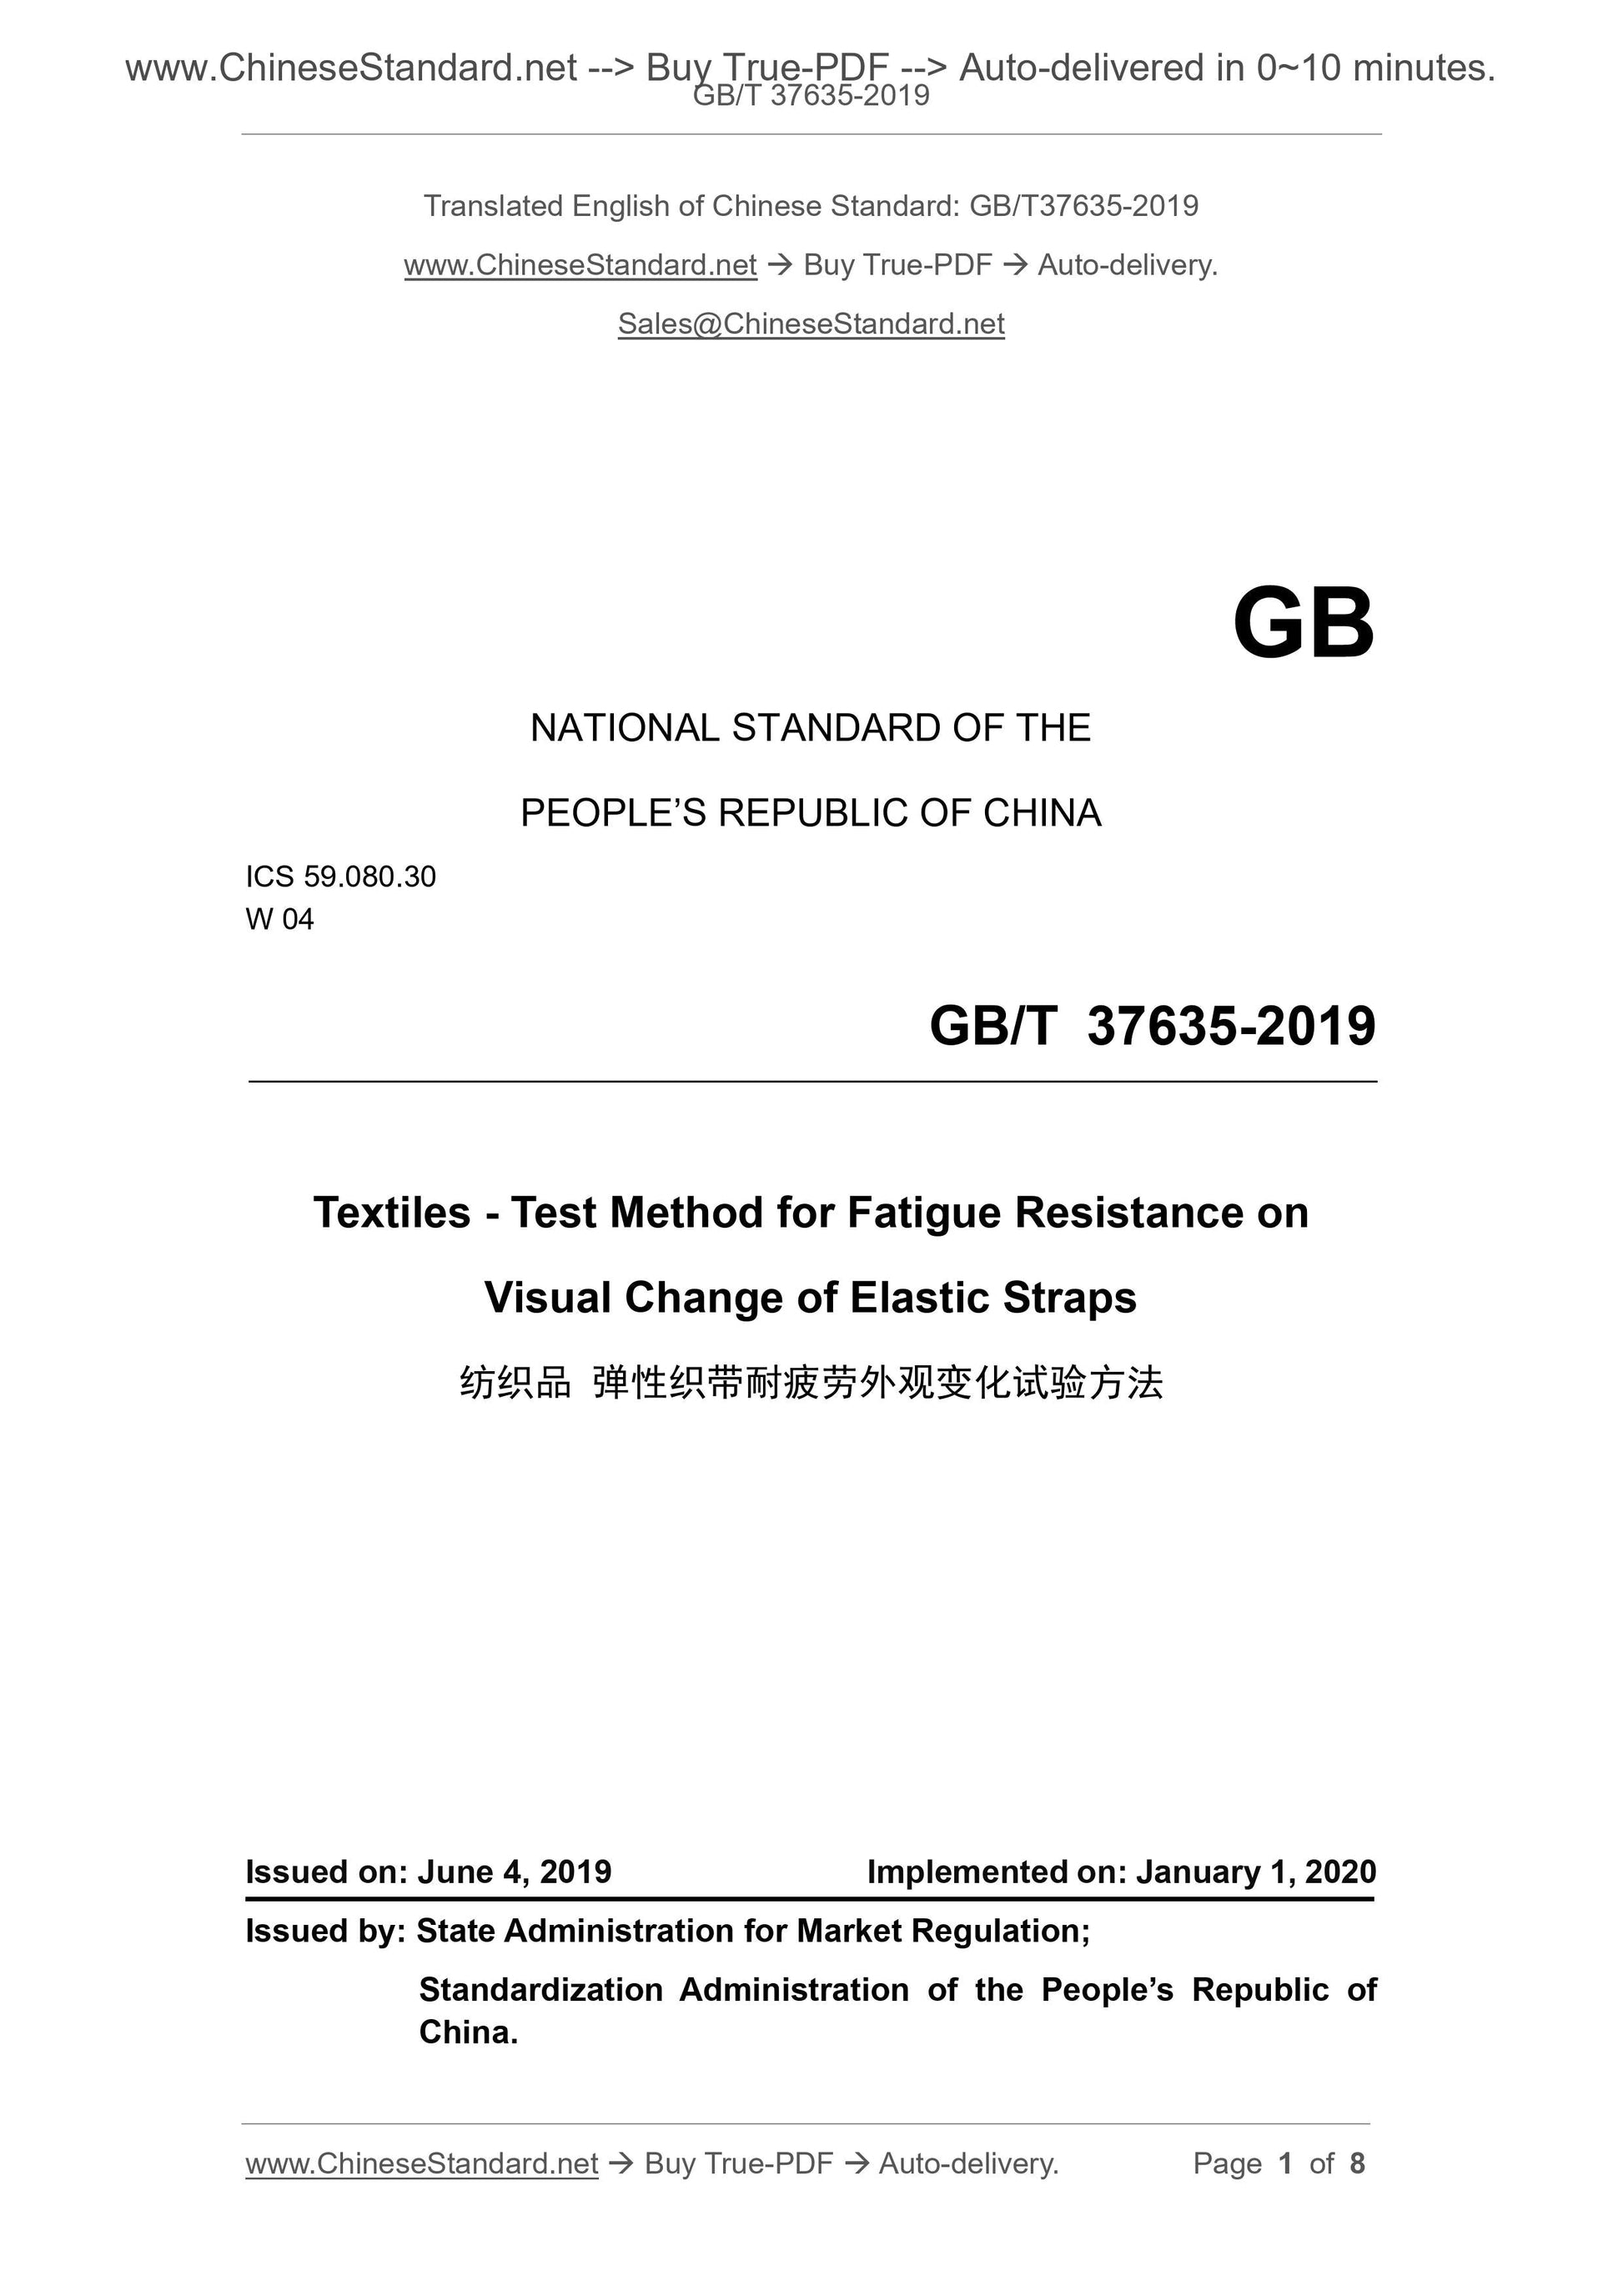 GB/T 37635-2019 Page 1